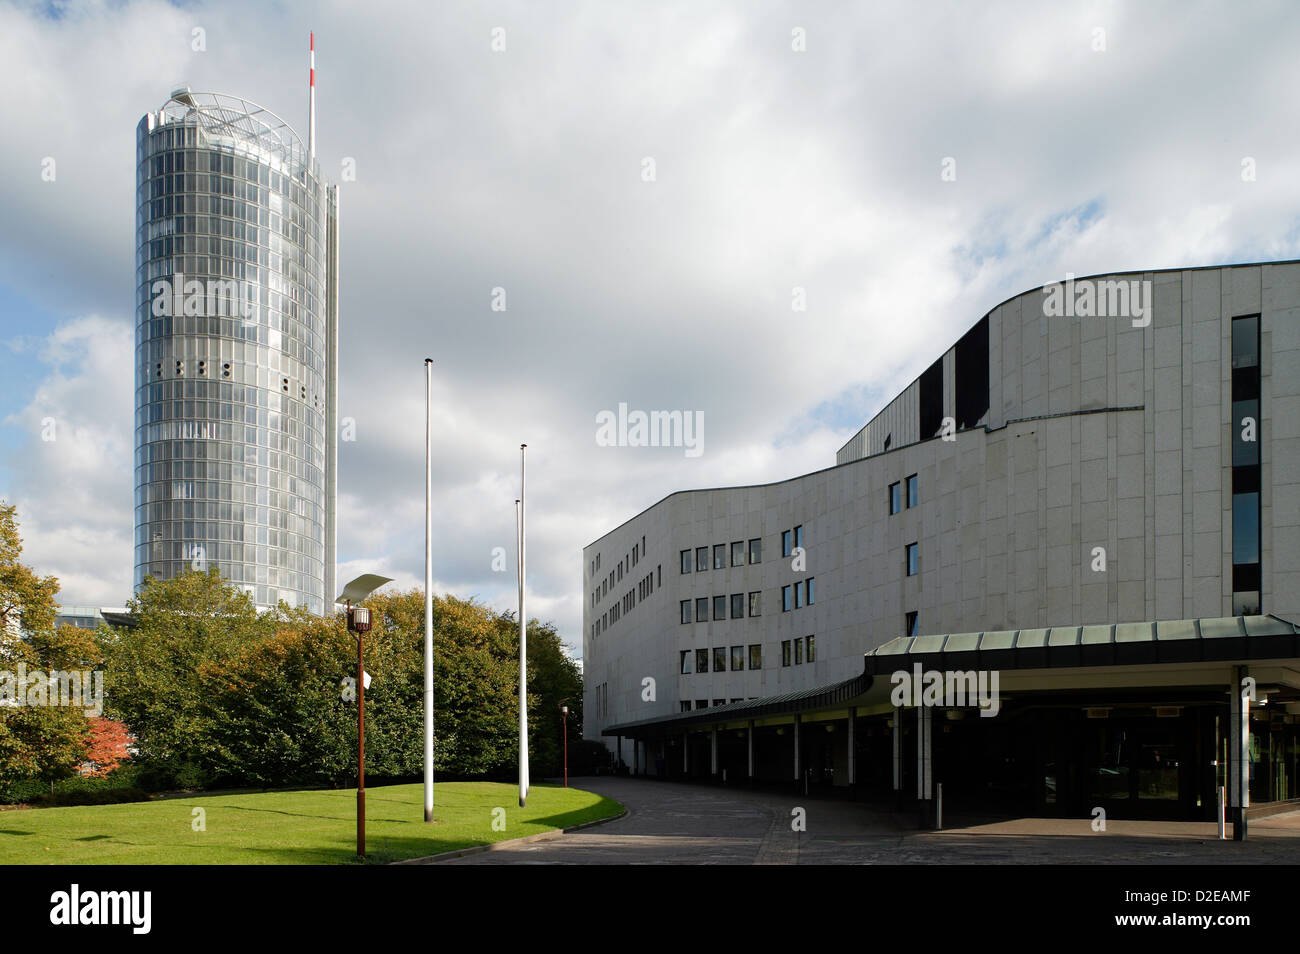 Essen, Germany, the Aalto Theater and RWE Tower left Stock Photo